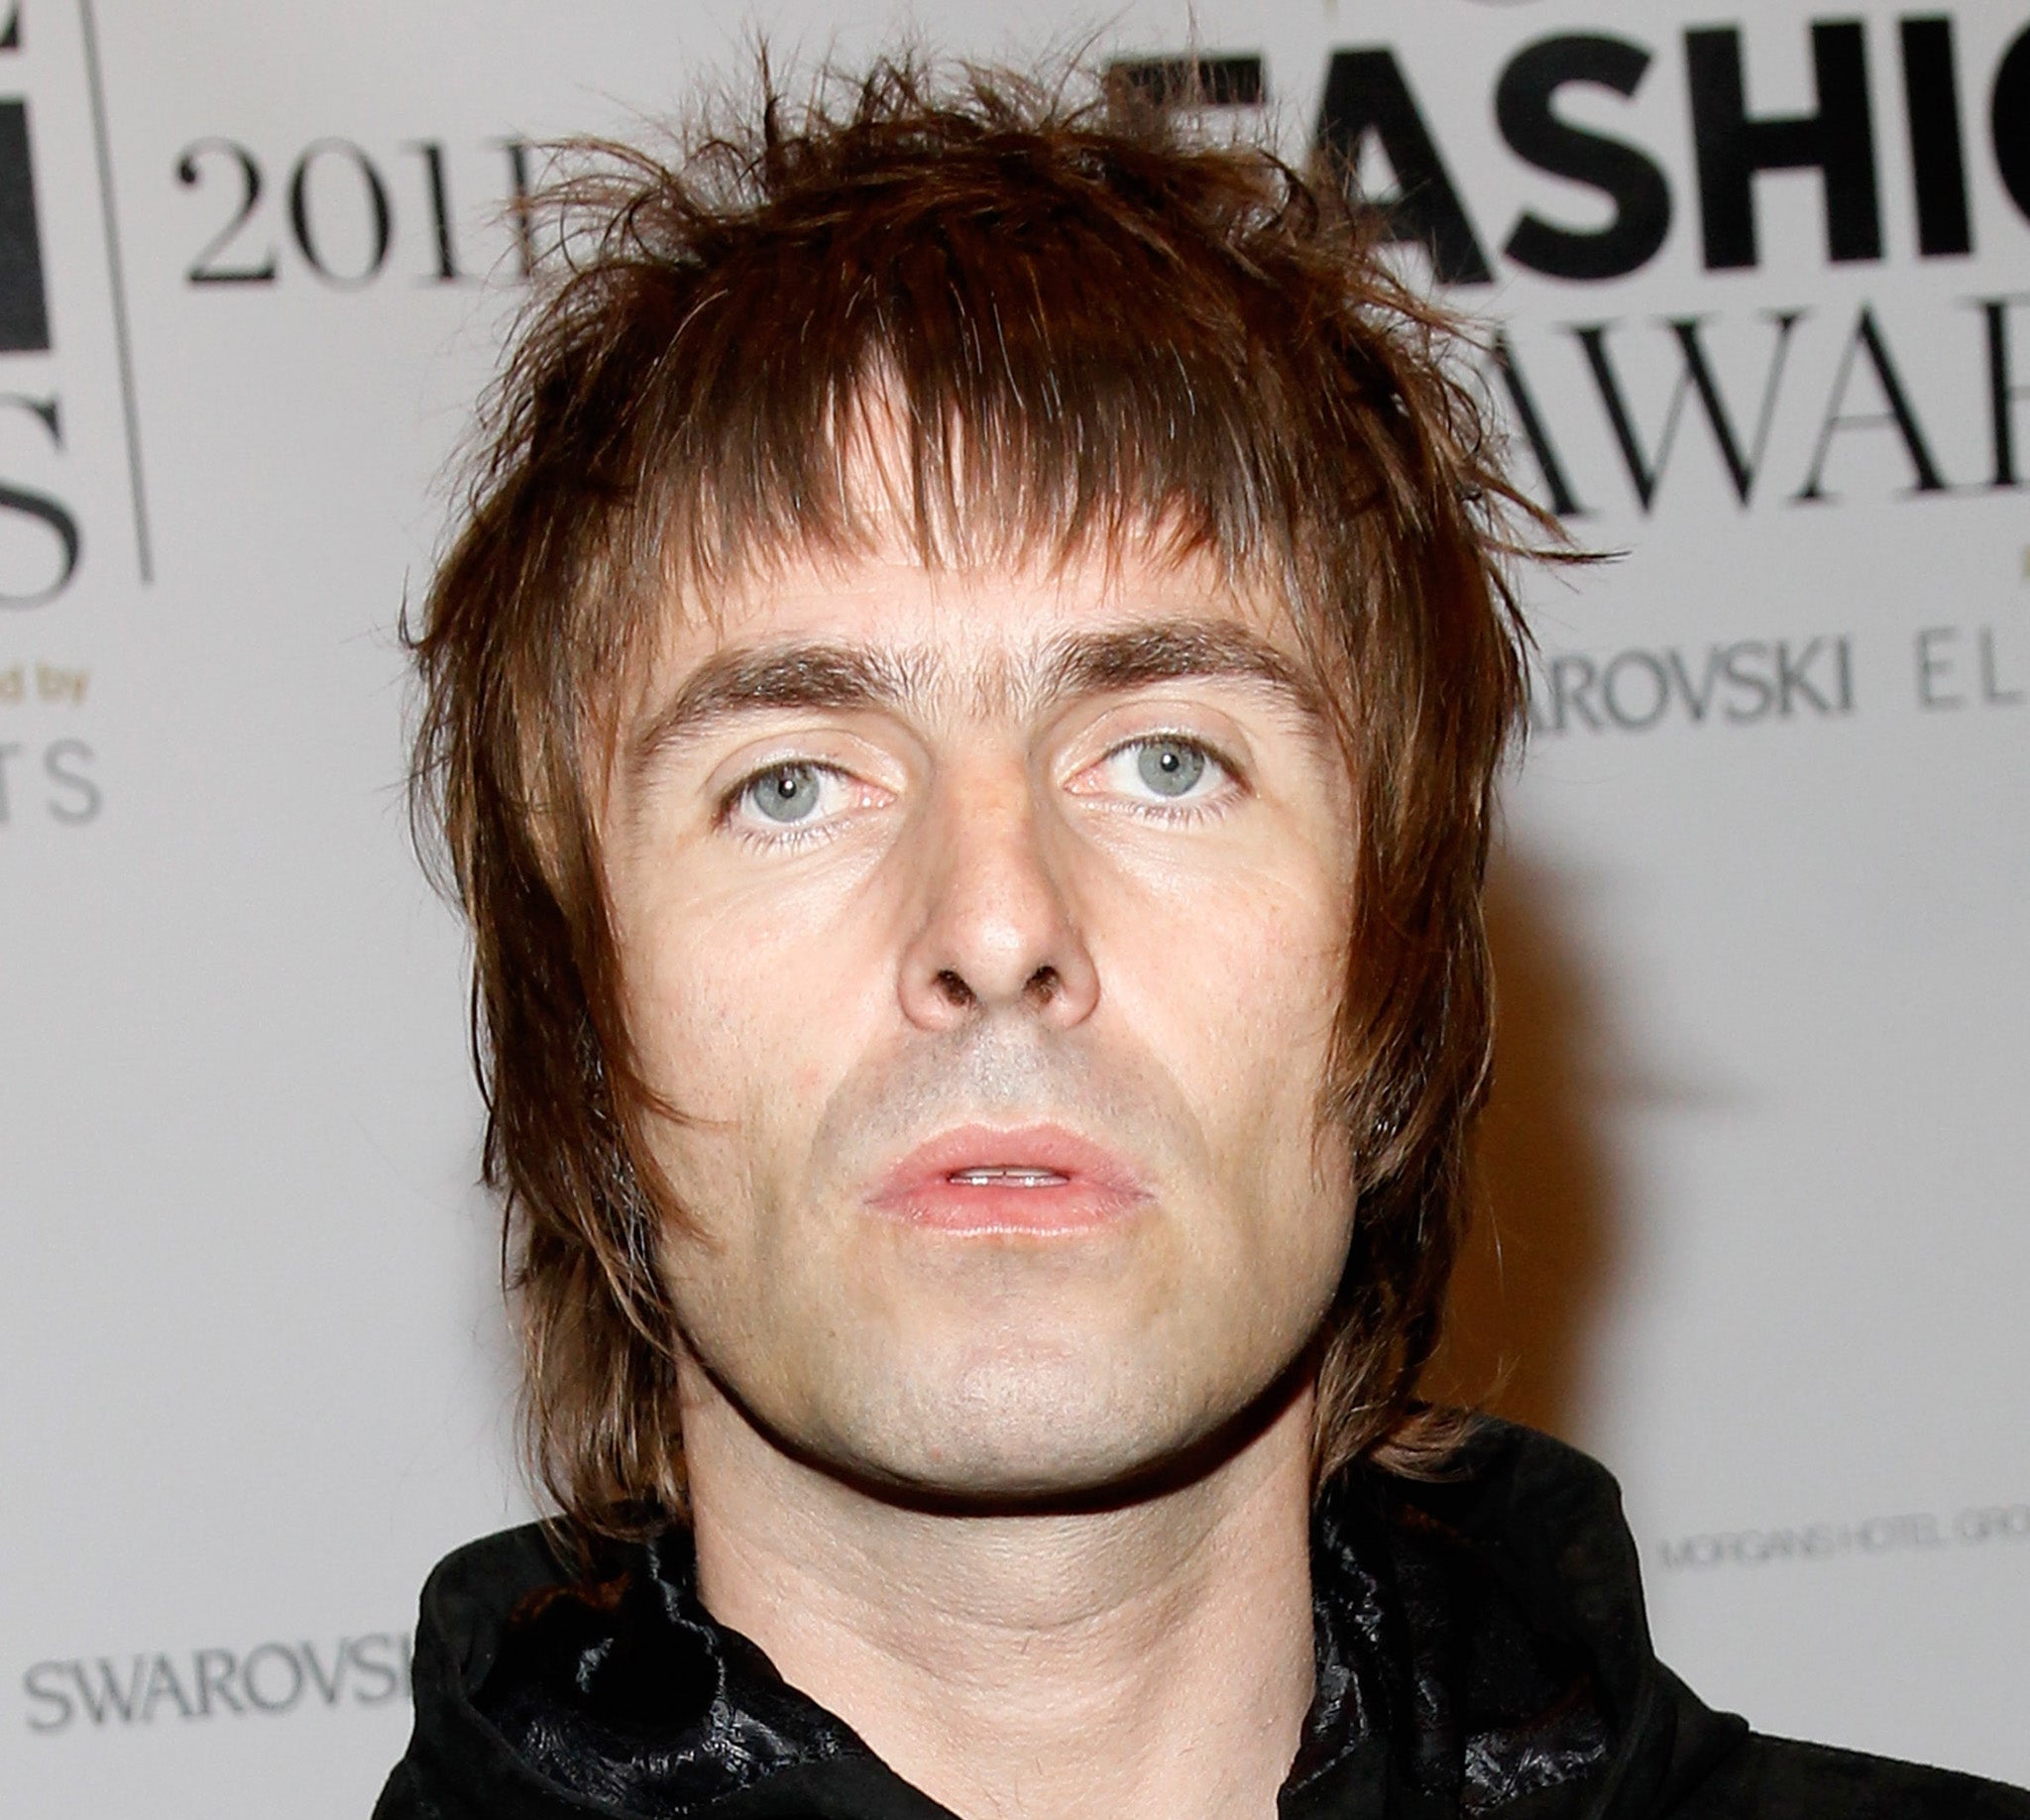 Liam Gallagher has backed out of a pledge to appear on the X Factor